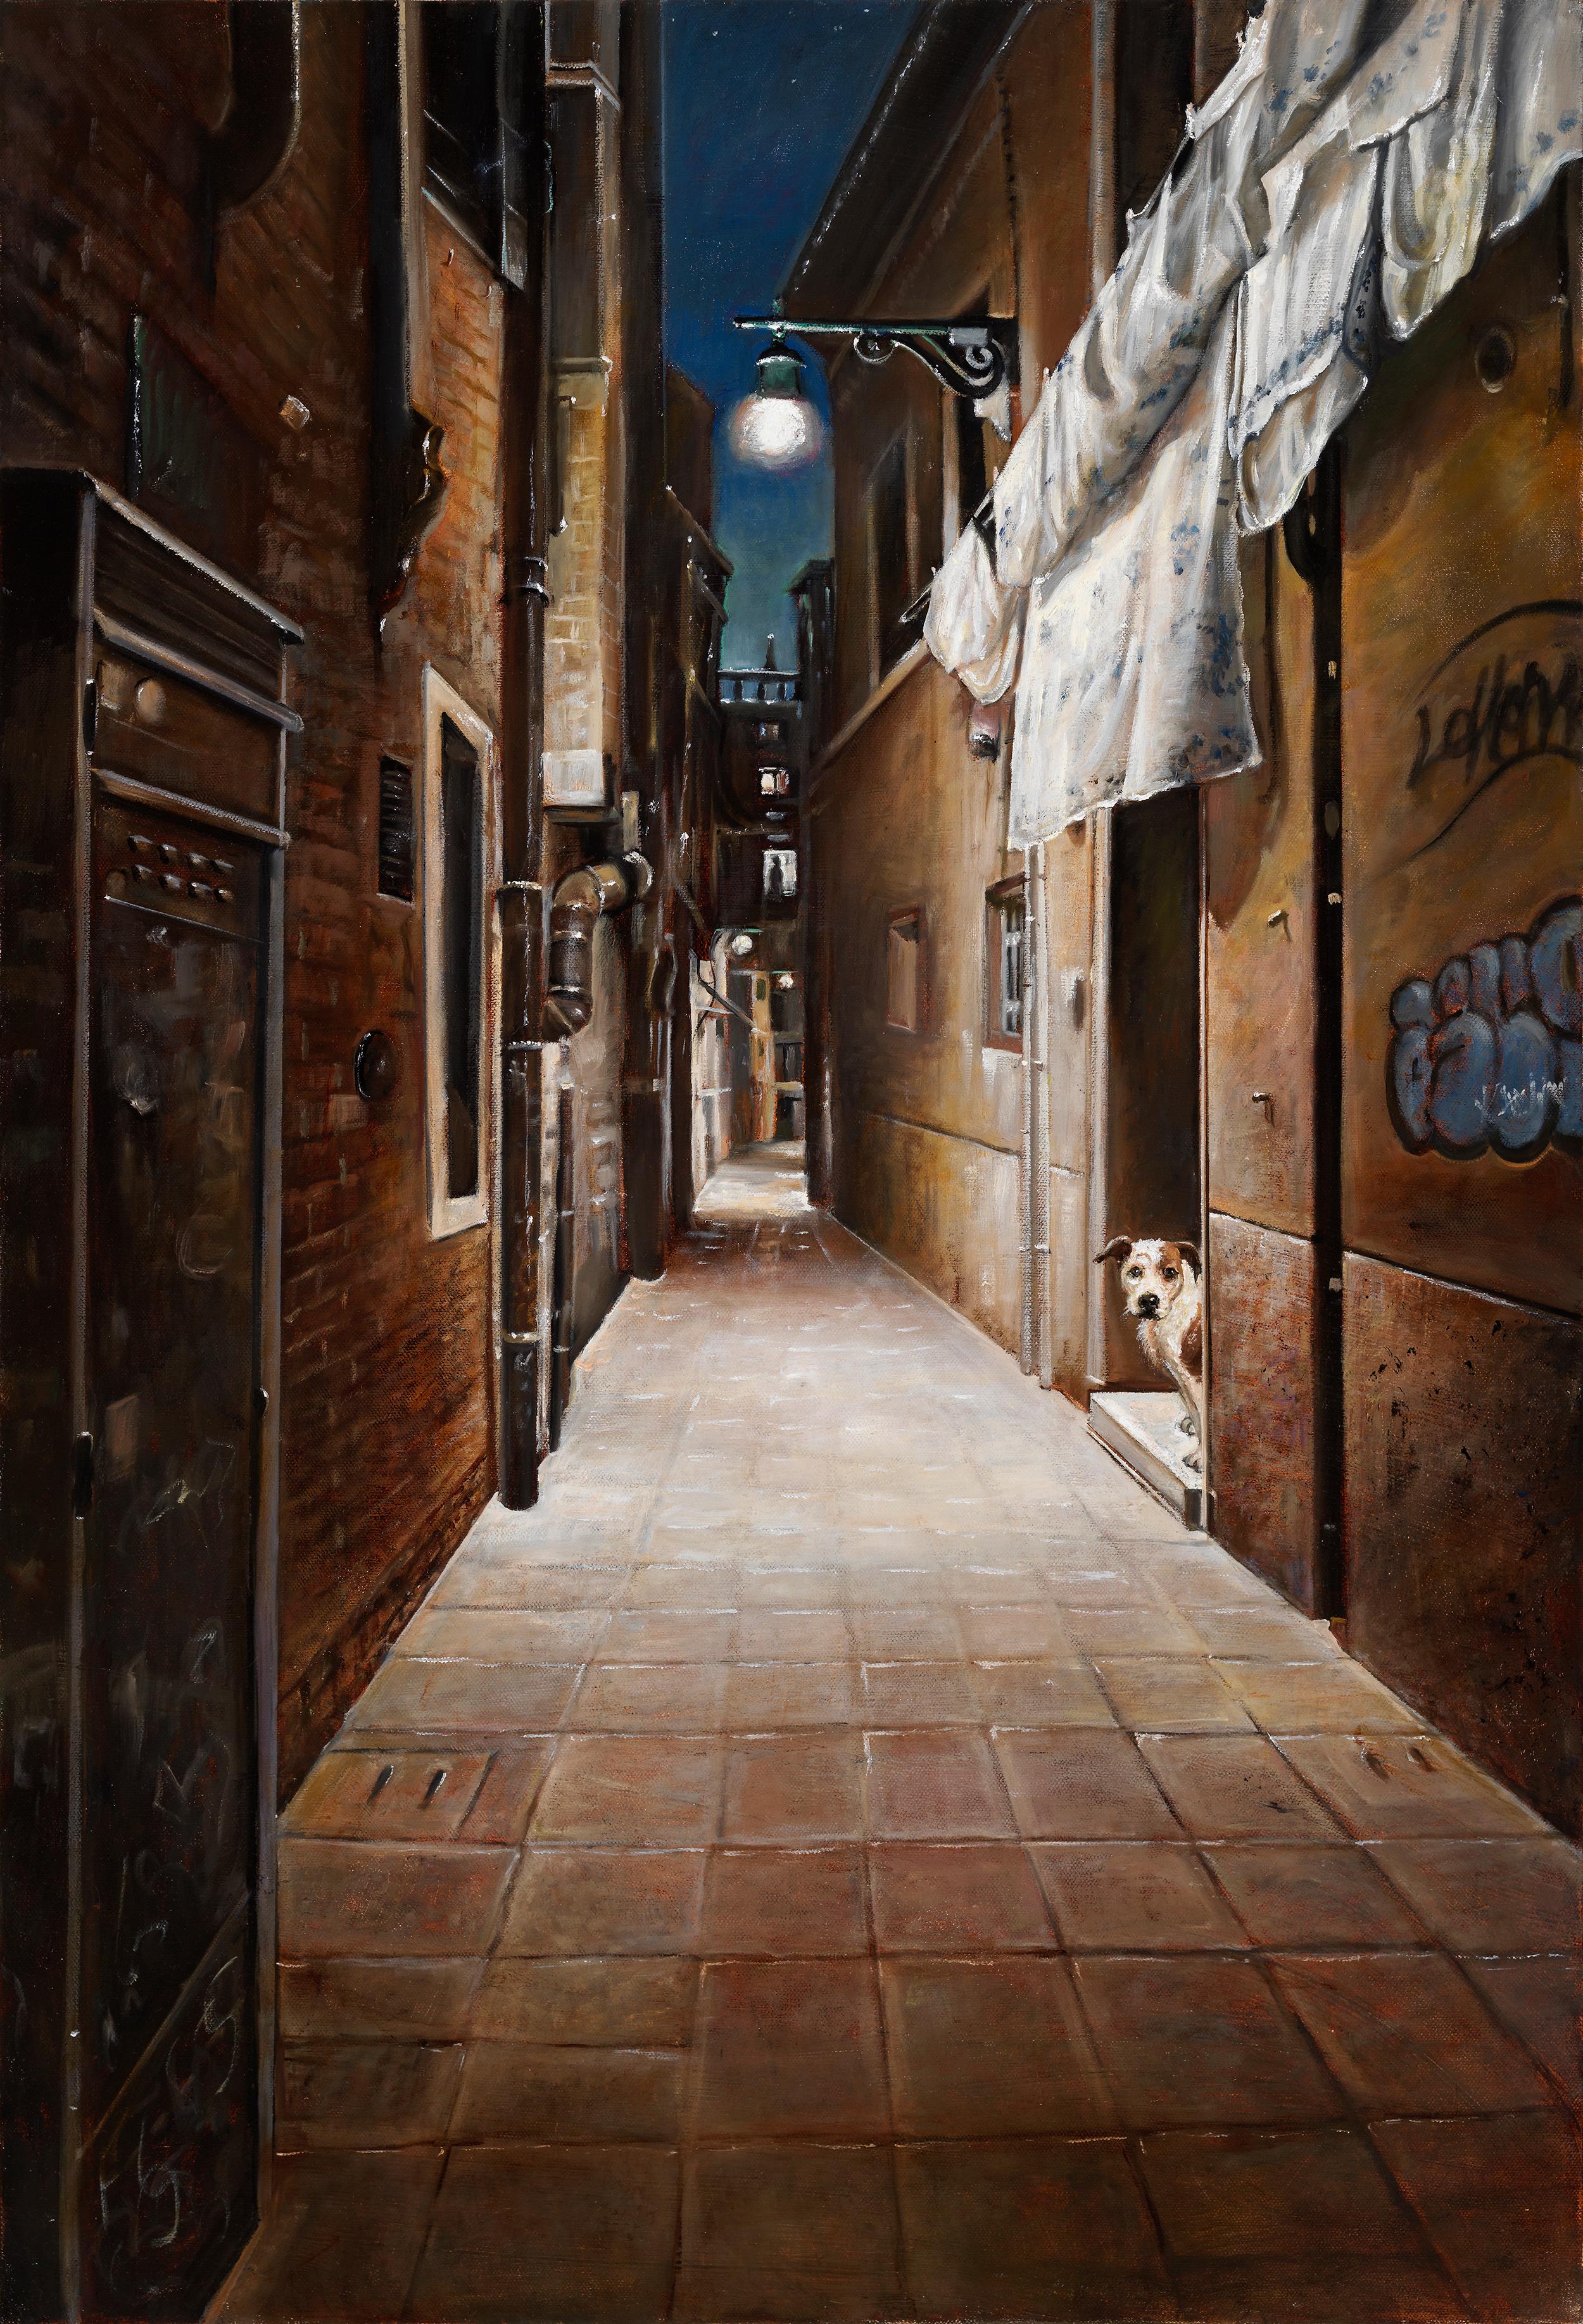 Bruno Surdo Animal Painting - The Lost Dog of Venice - Back Streets, Nighttime Scene Original Oil on Canvas